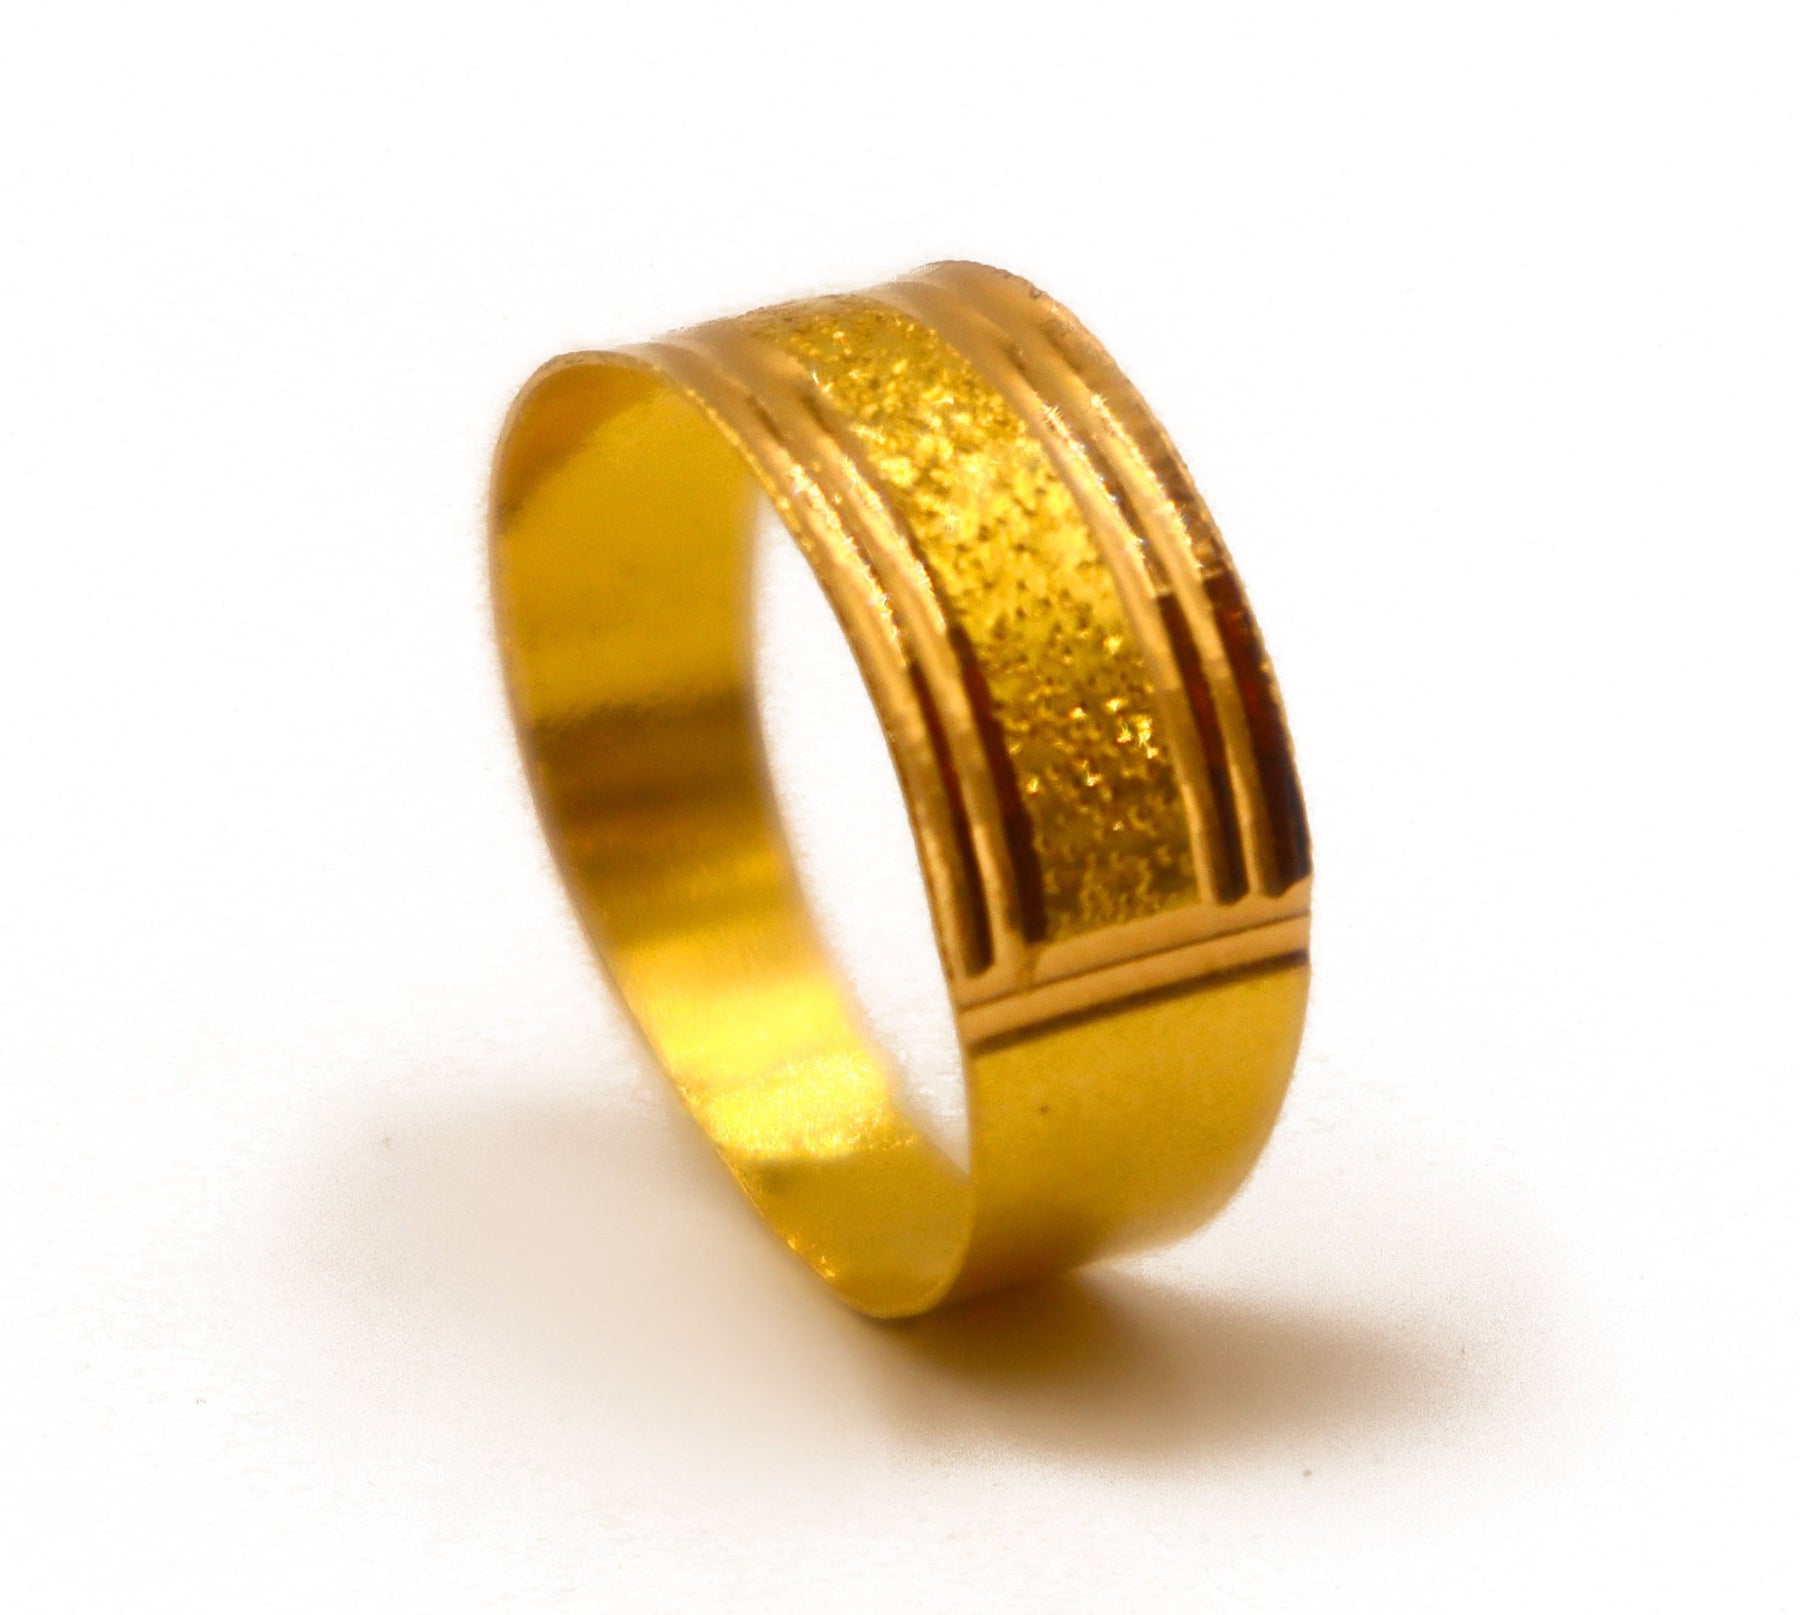 Premium AI Image | a pair of gold wedding rings with diamonds